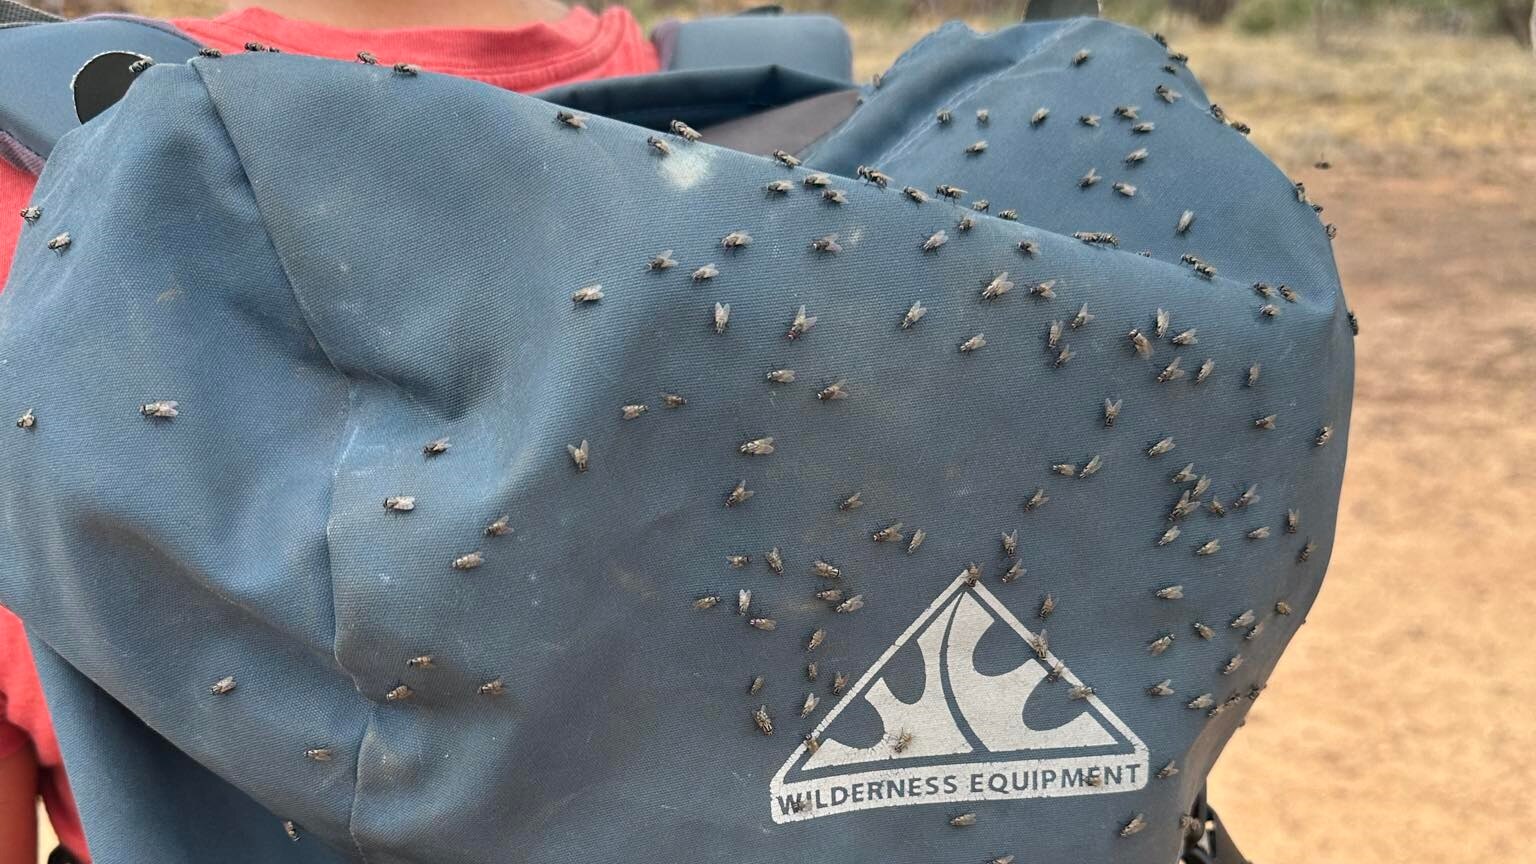 bush fly population explodes in central australia as hot, humid weather creates perfect breeding conditions